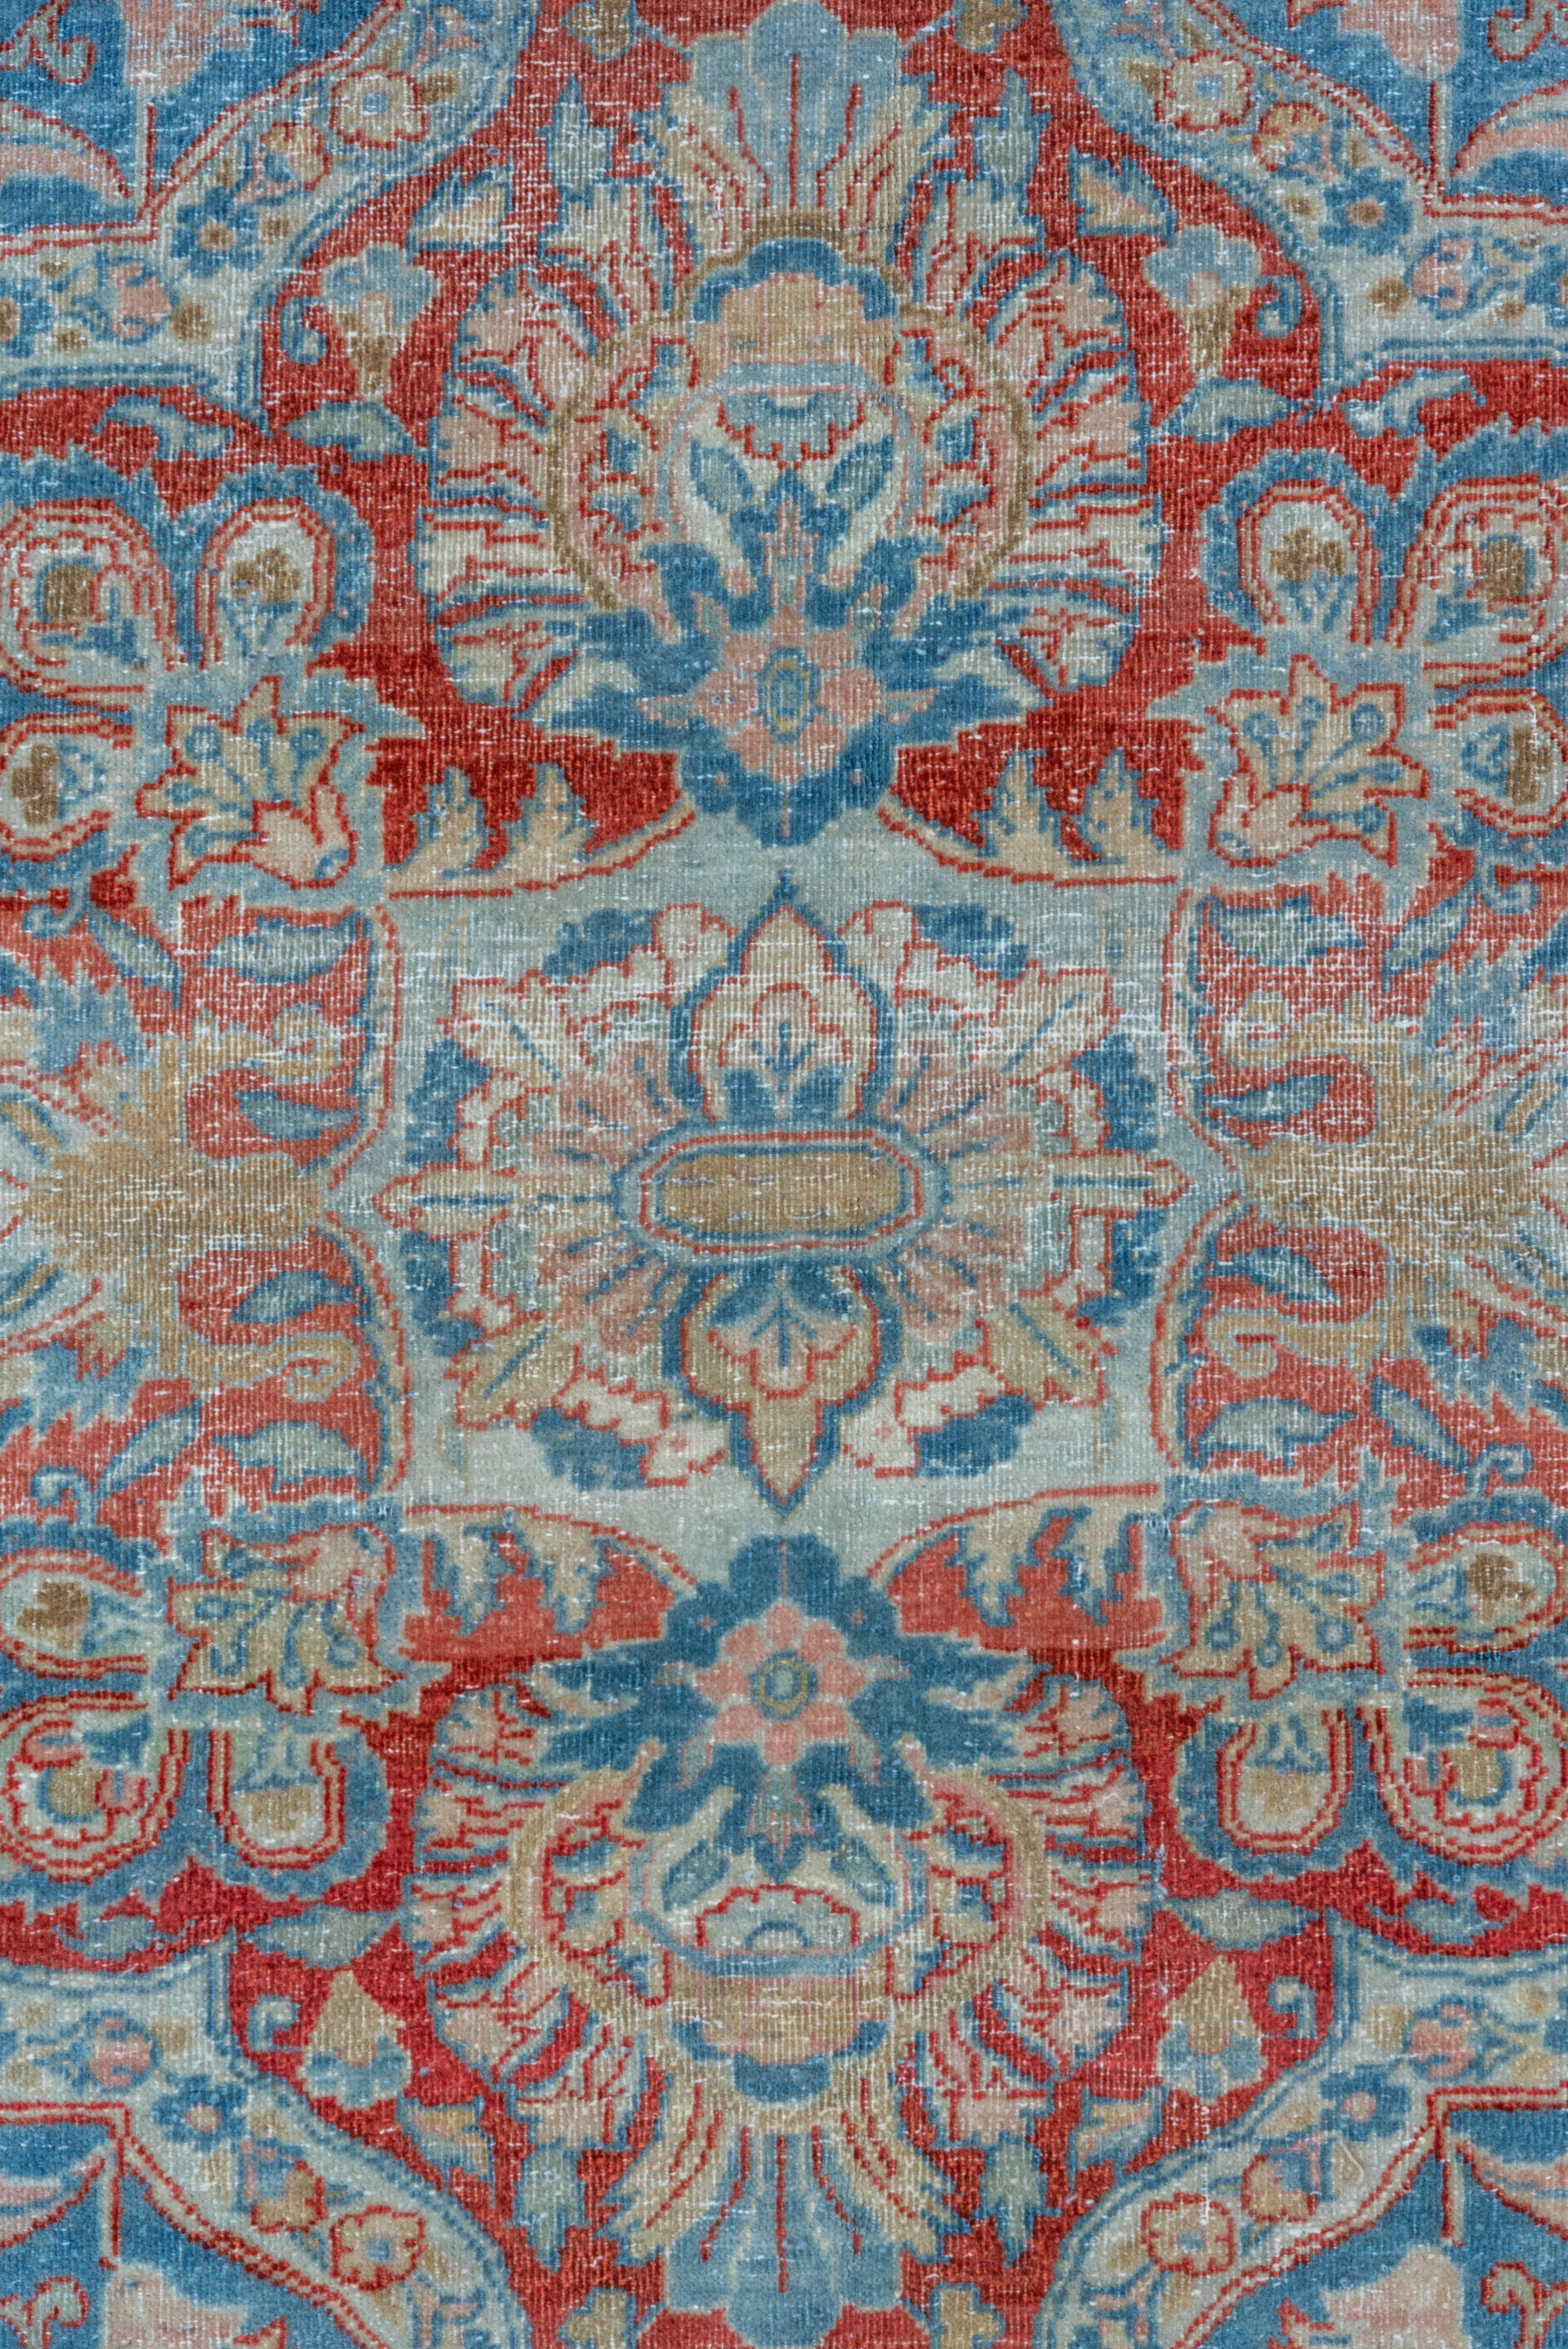 Hand-Knotted Eliko Rugs by David Ariel Finely Woven Antique Kashan Carpet with Reds and Blues For Sale